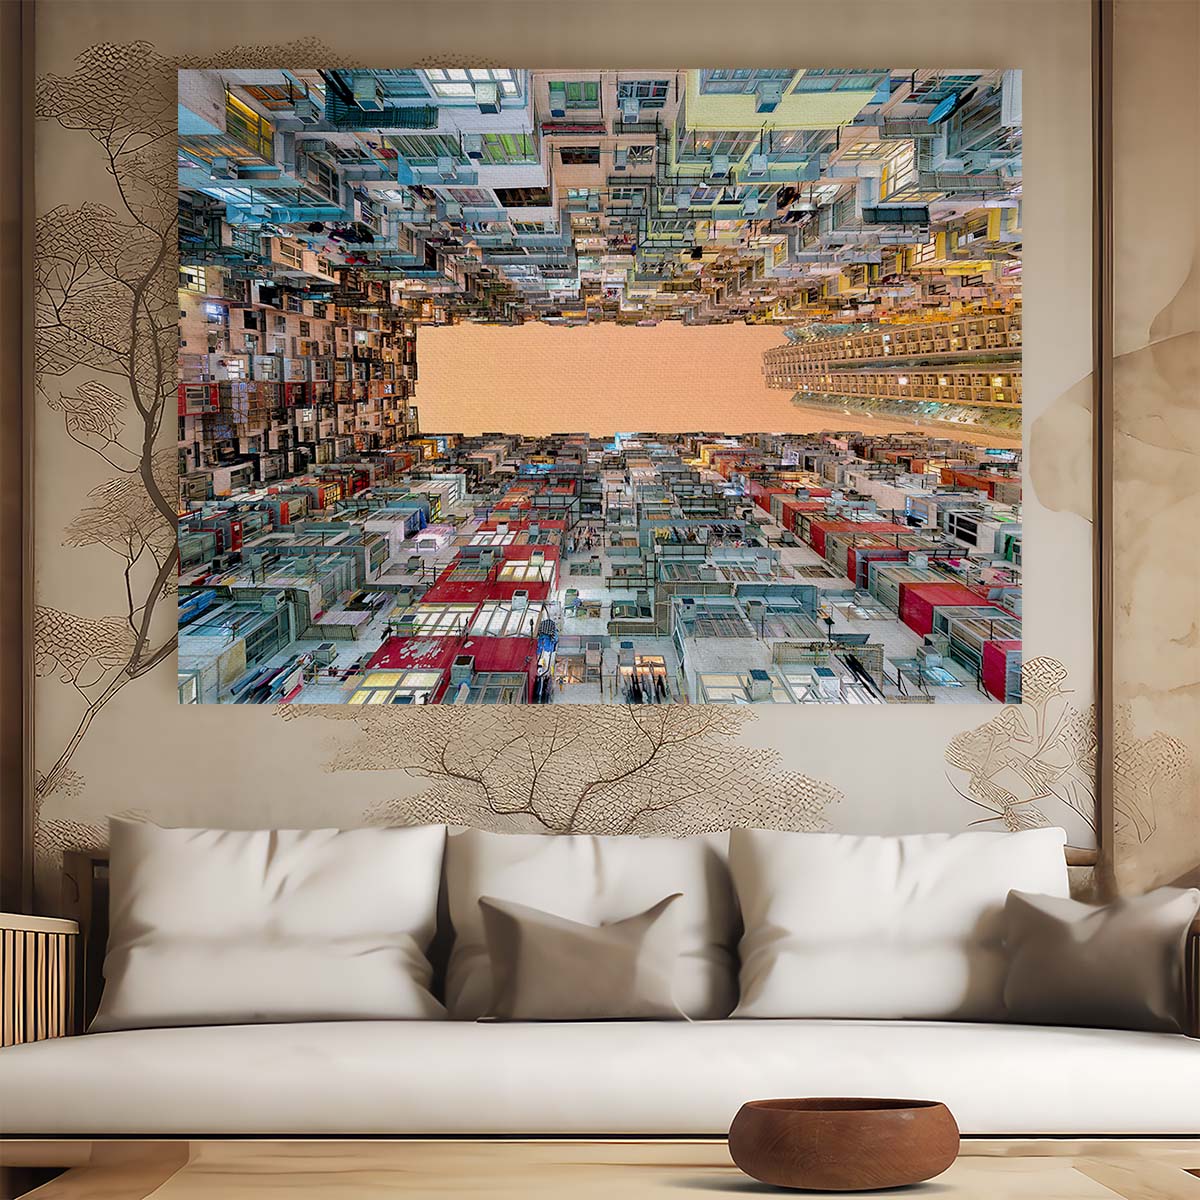 Futuristic Hong Kong Urban Density Wall Art by Luxuriance Designs. Made in USA.